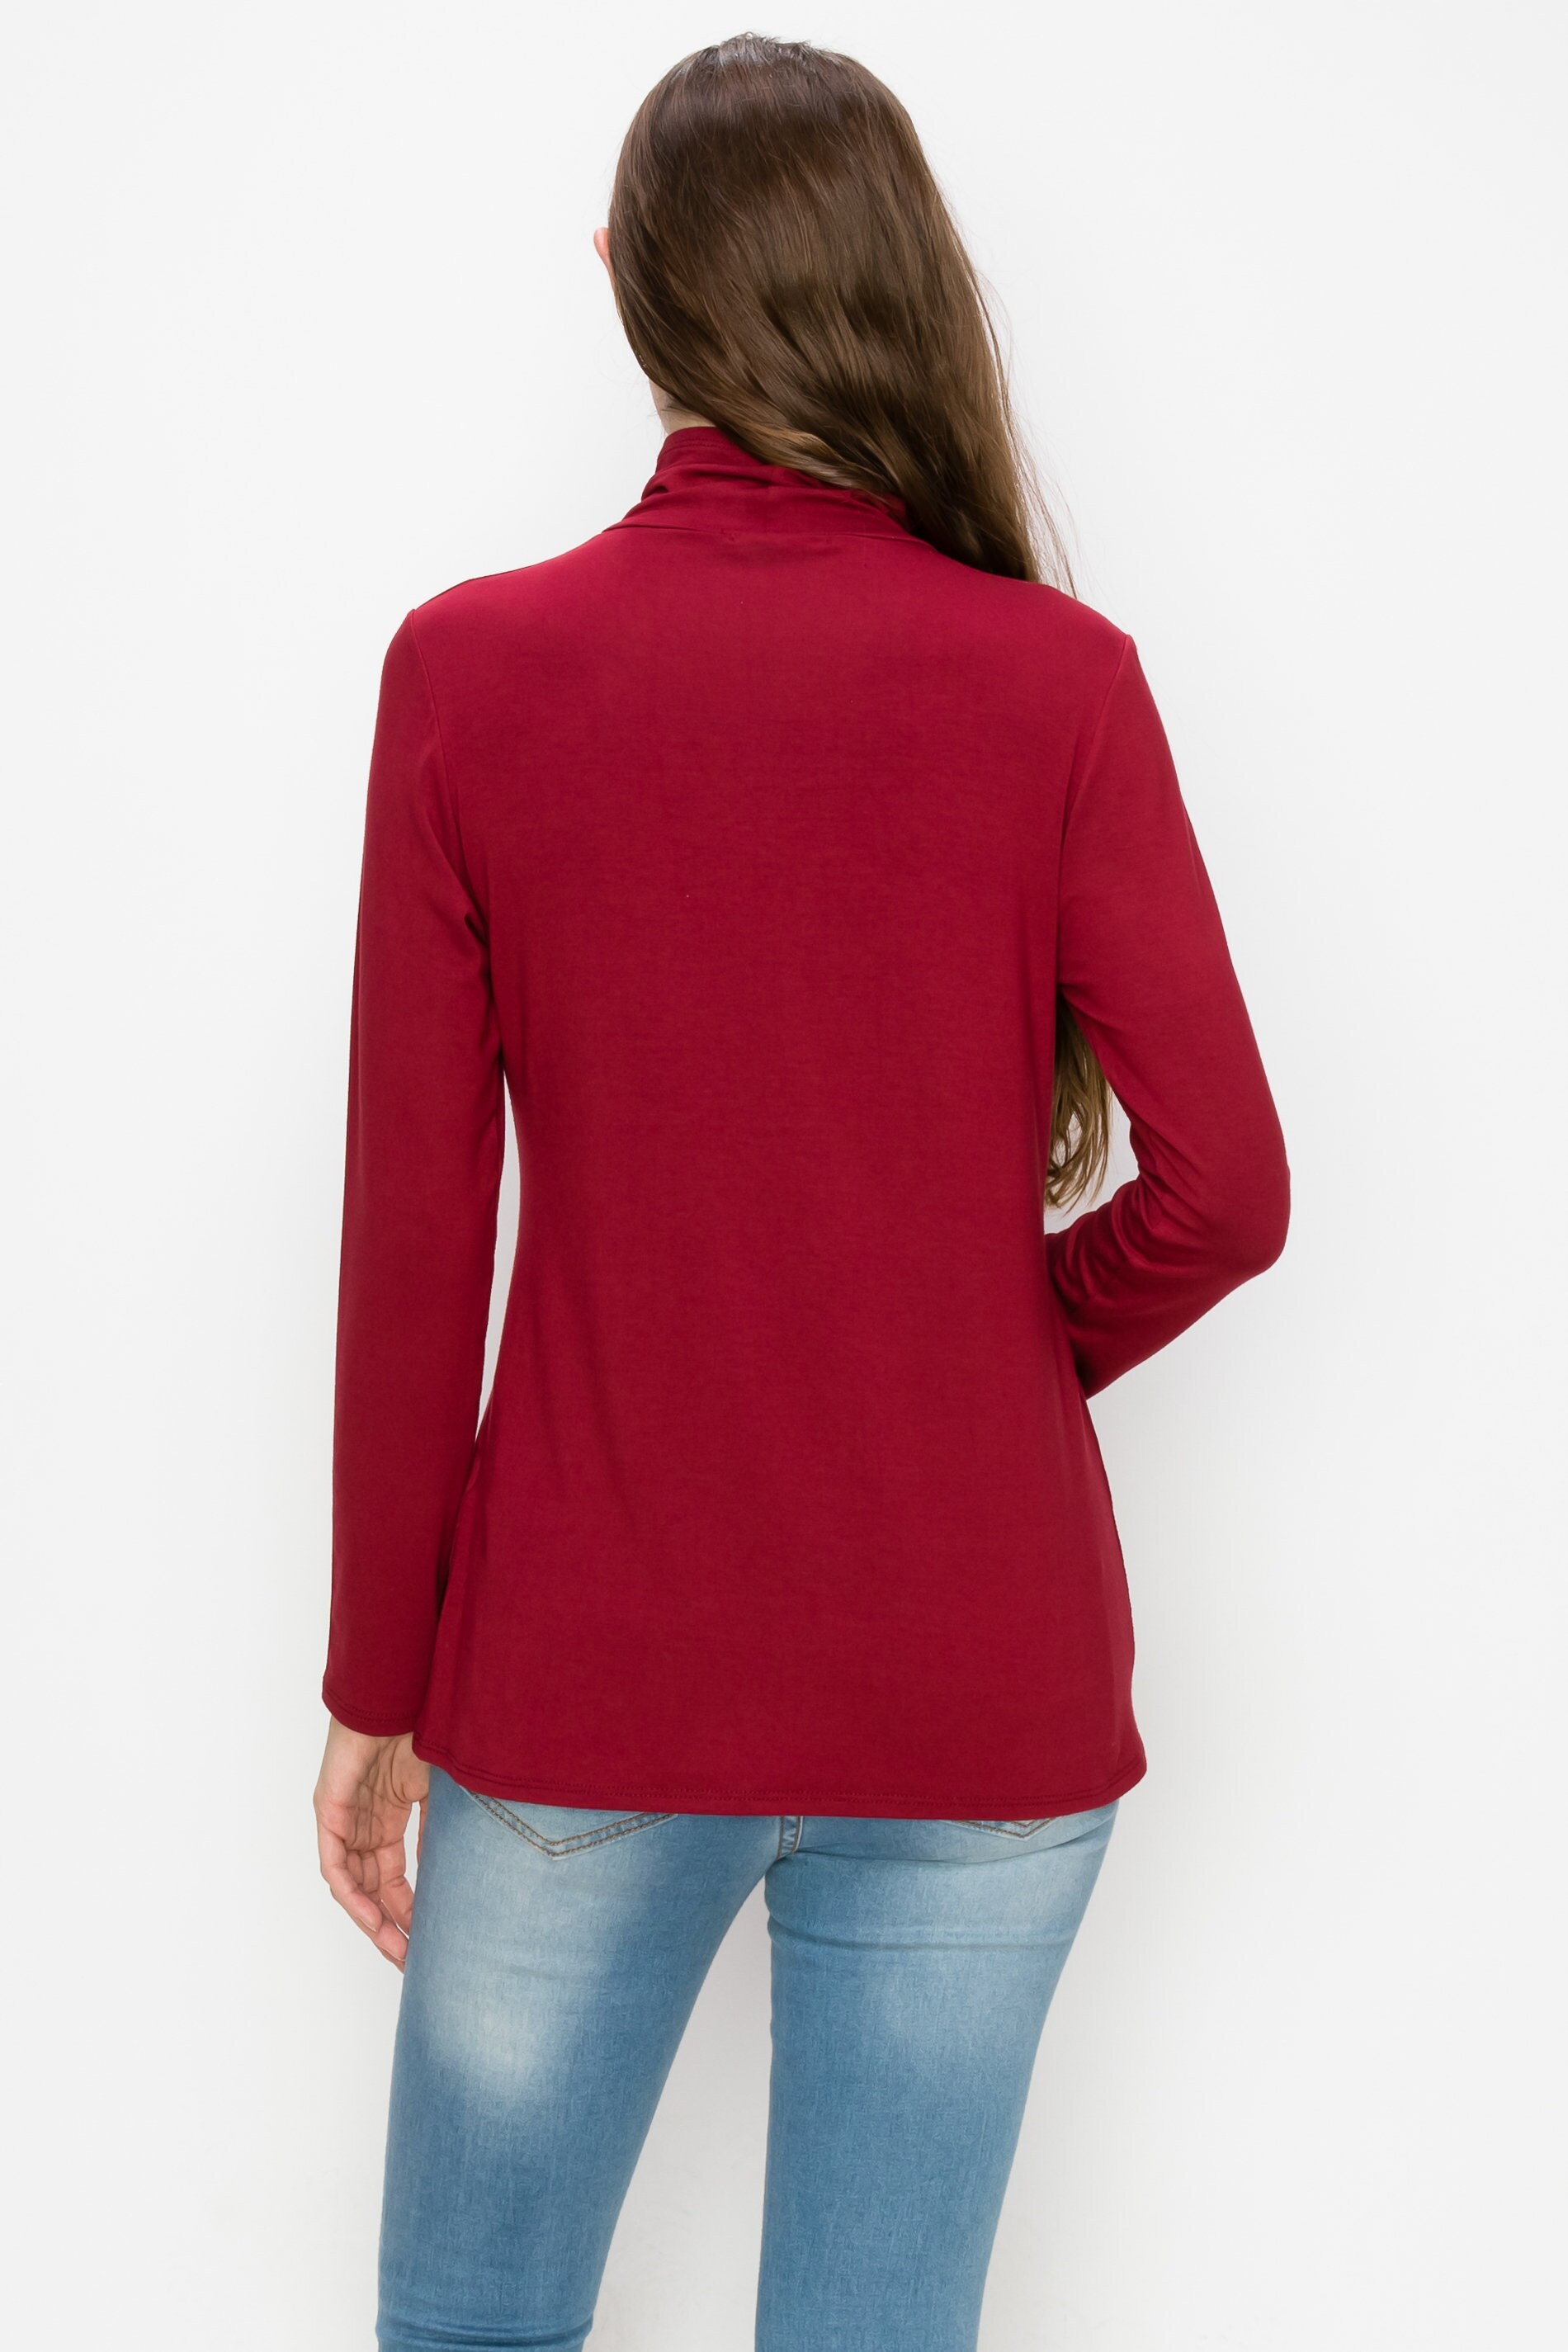 Rayon Spandex Tops for Women, Long Sleeve Slim Fit Lightweight